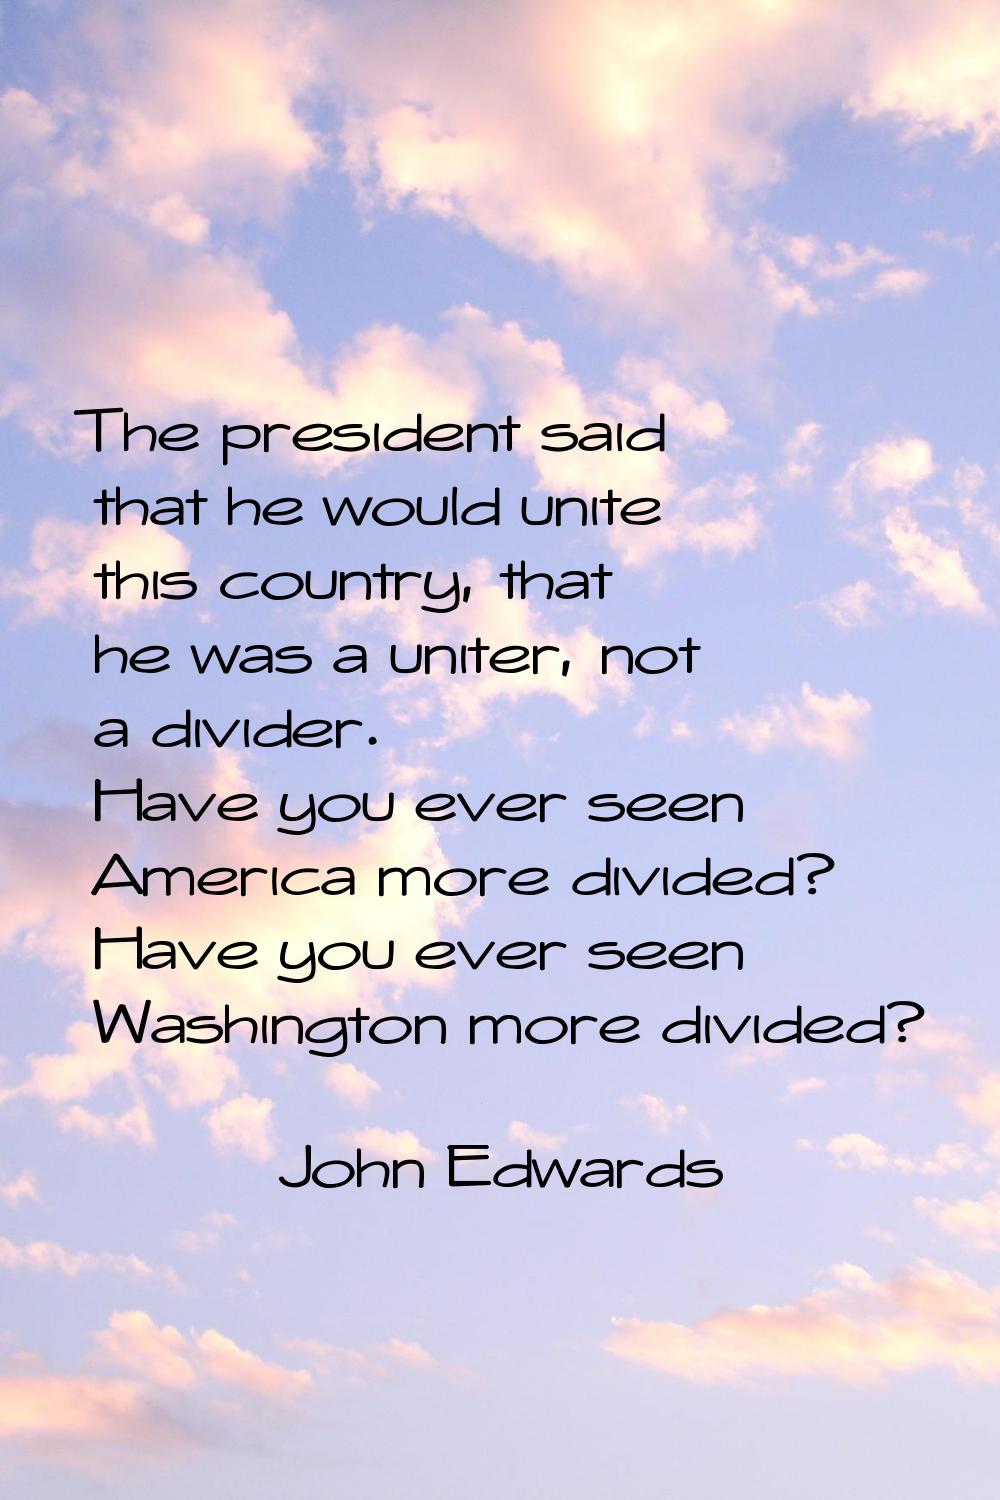 The president said that he would unite this country, that he was a uniter, not a divider. Have you 